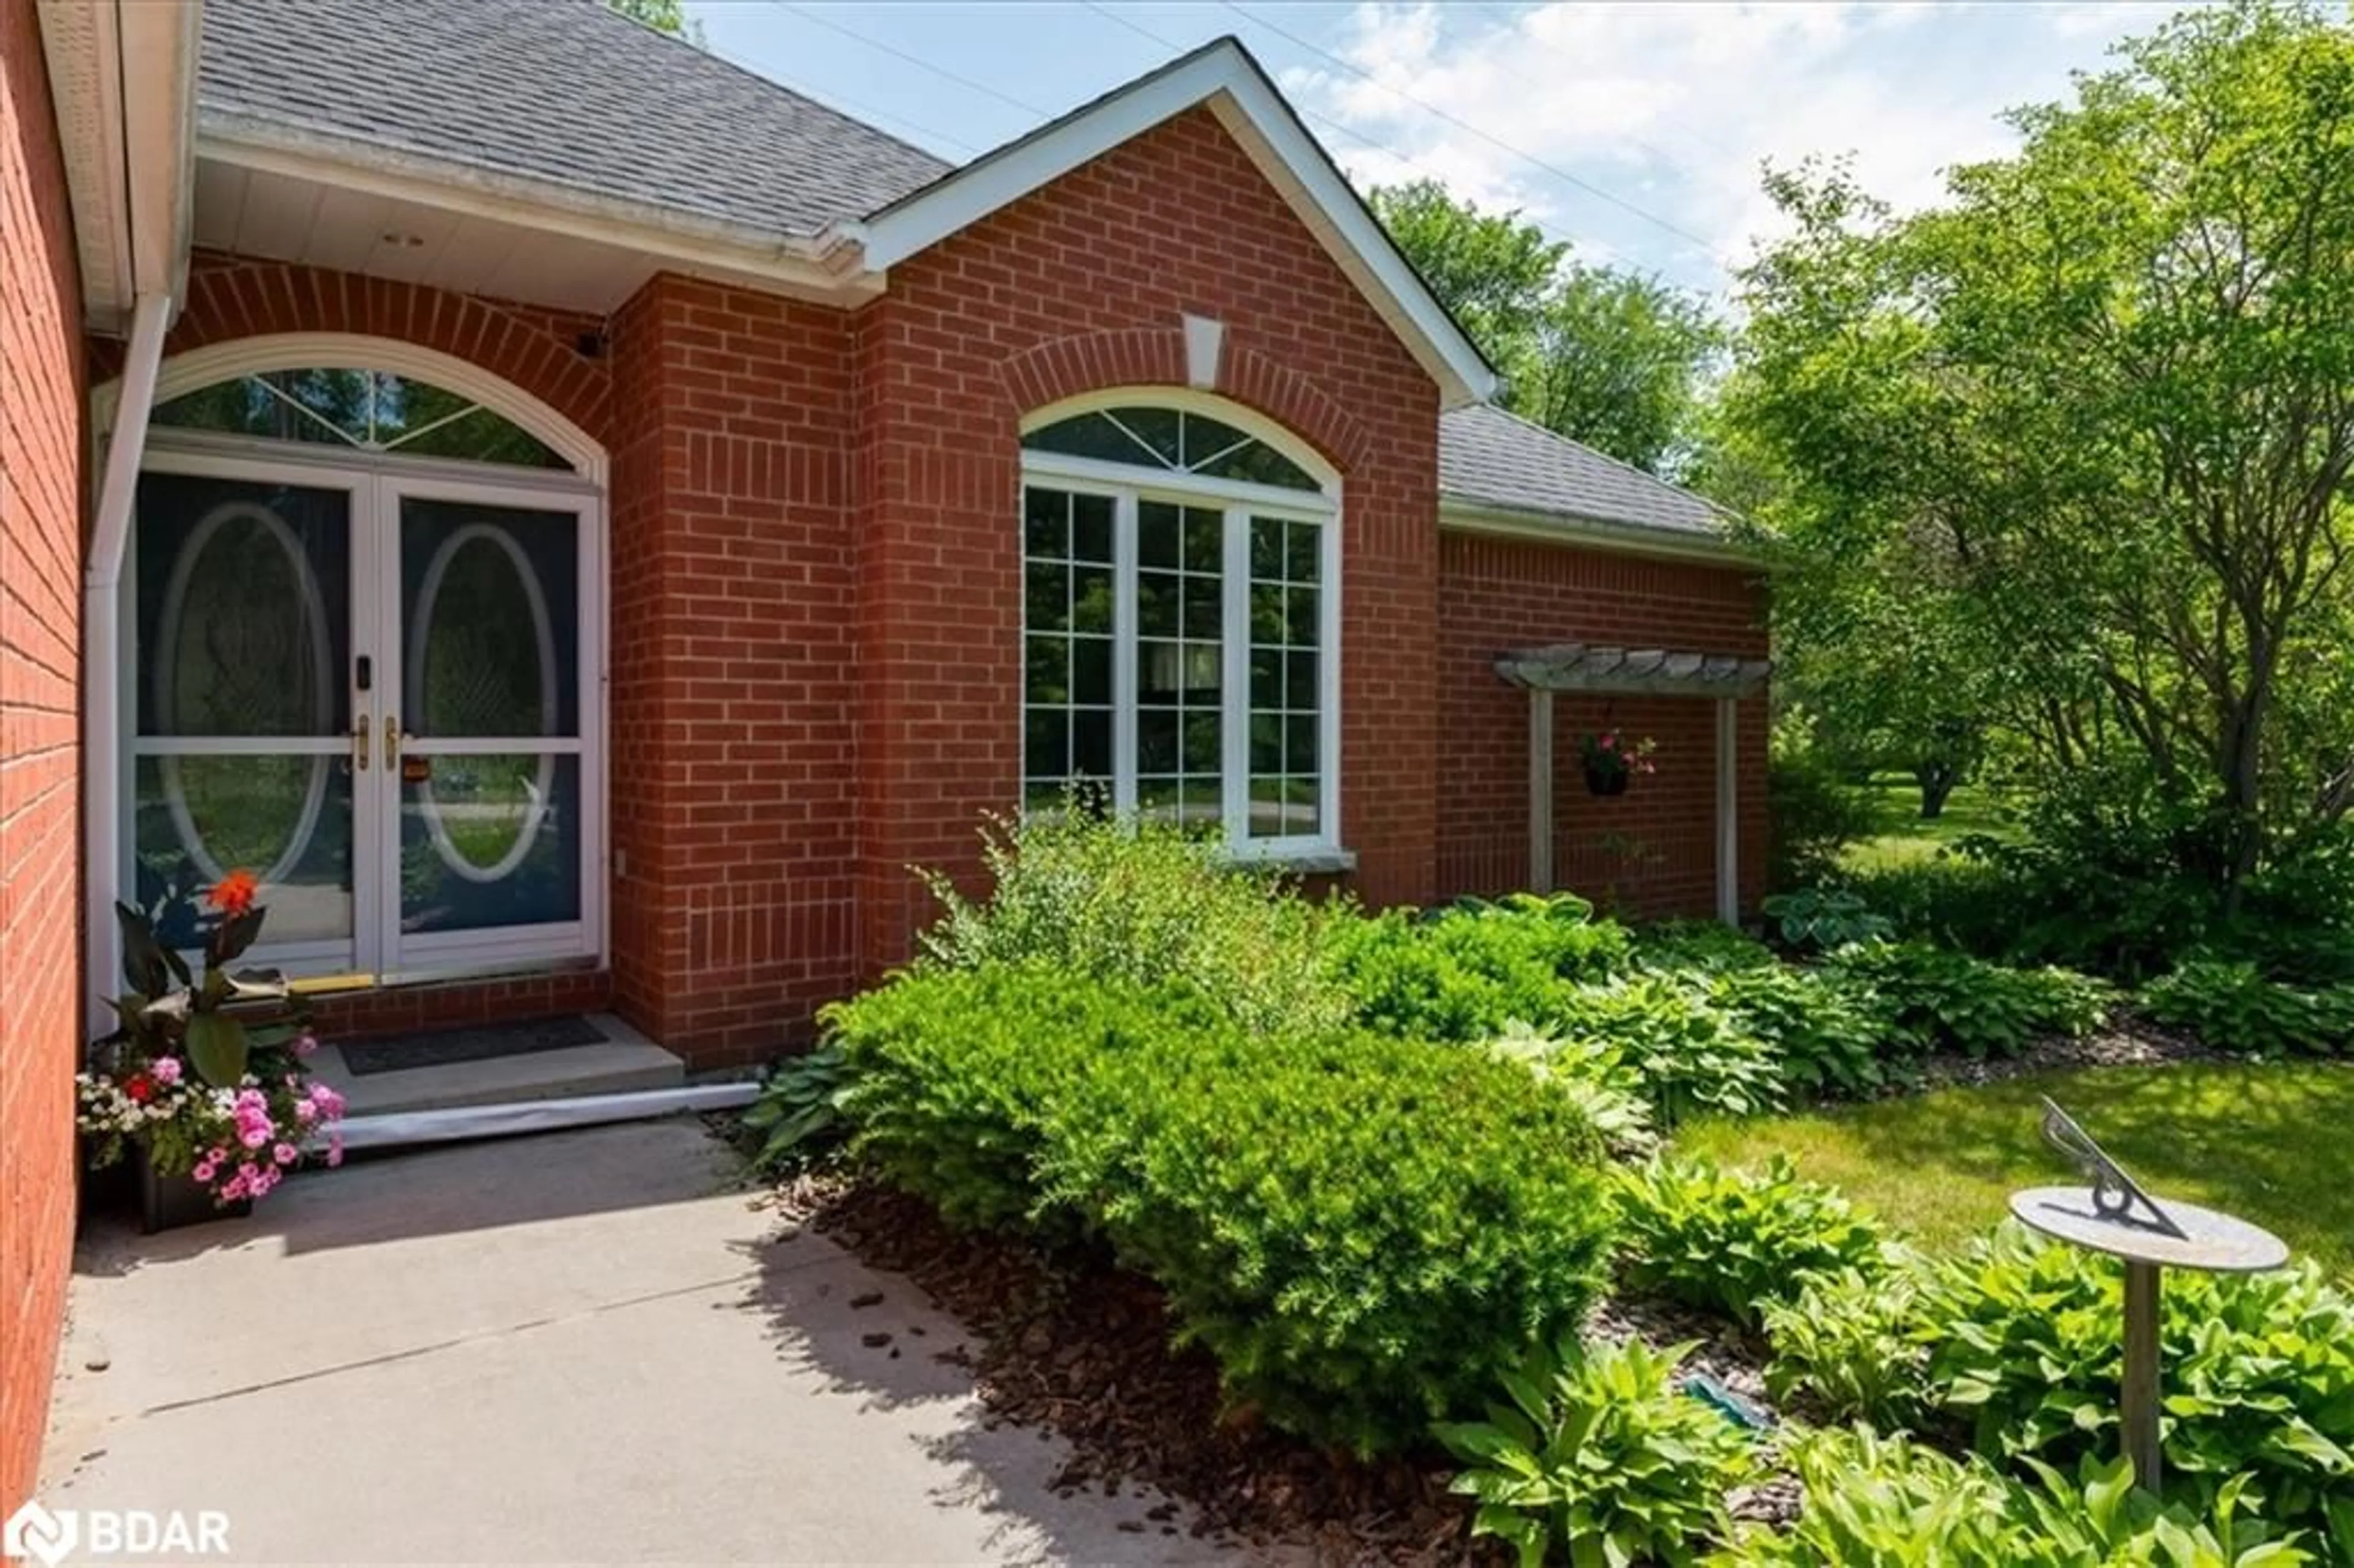 Home with brick exterior material for 2403 Sunnidale Rd, Utopia Ontario L0M 1T2